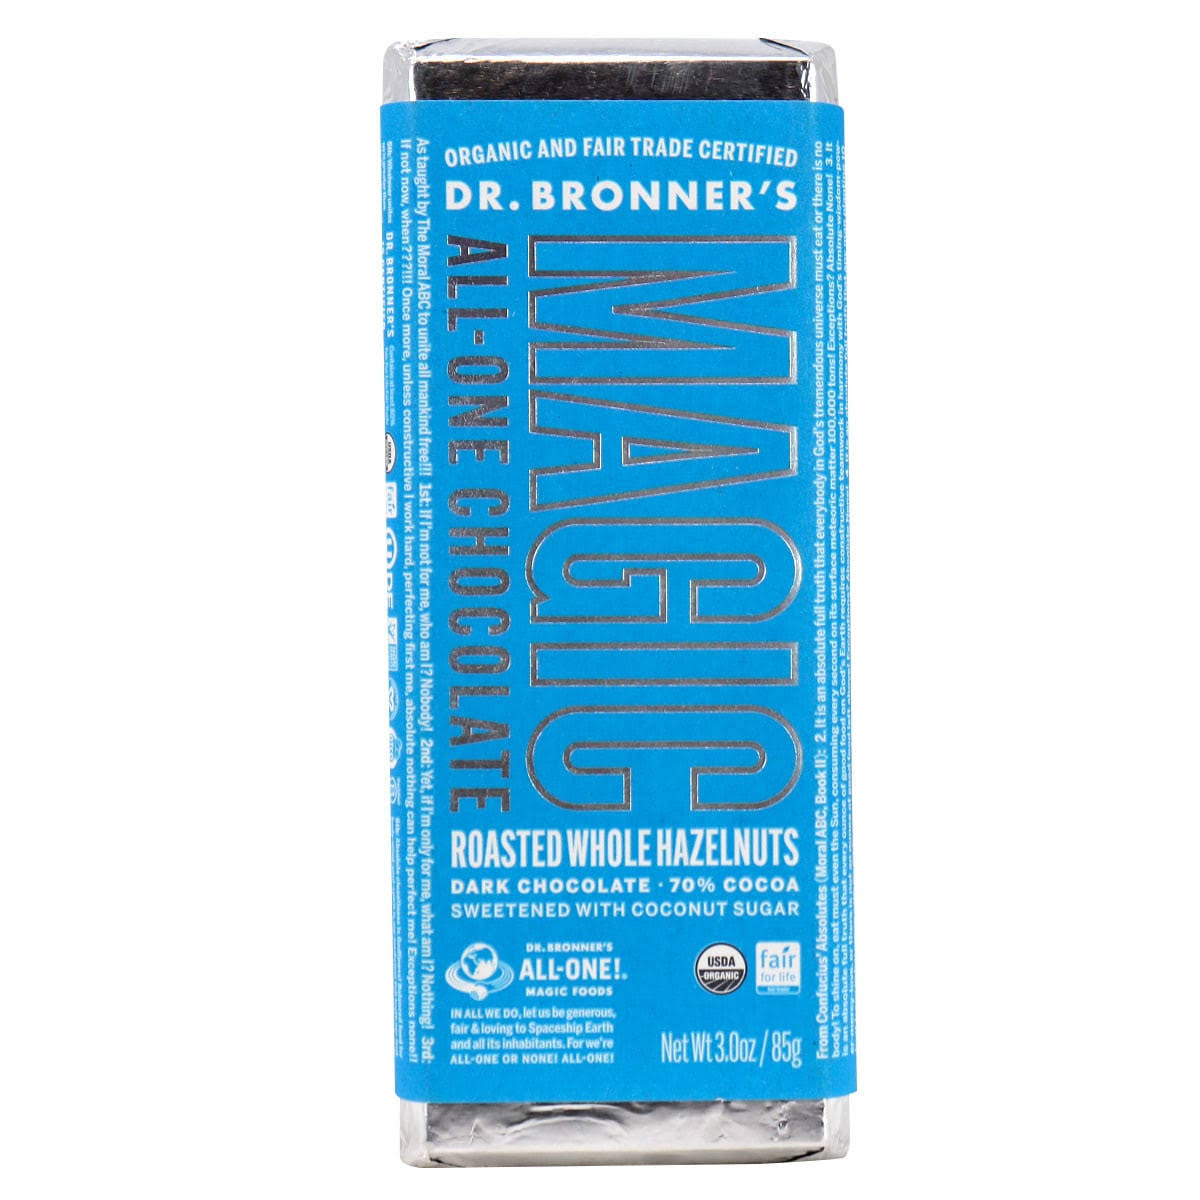 Dr. Bronner’s Fair Trade Magic All-One Chocolate Roasted Whole Hazelnuts, 85g